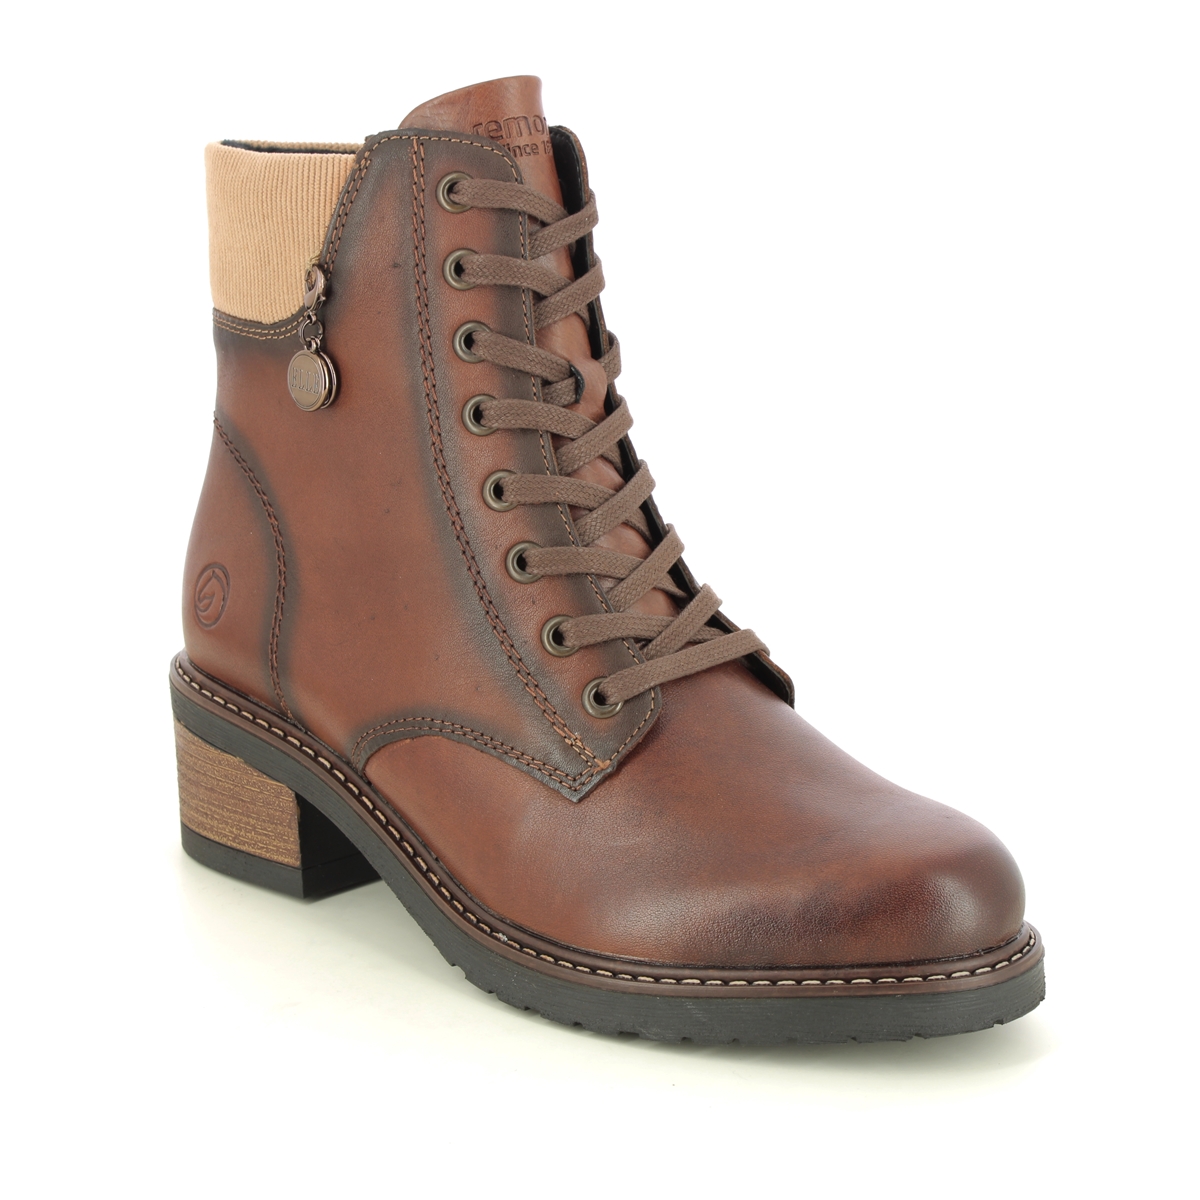 Remonte Menarem Elle Brown Leather Womens Lace Up Boots D1A70-22 In Size 39 In Plain Brown Leather